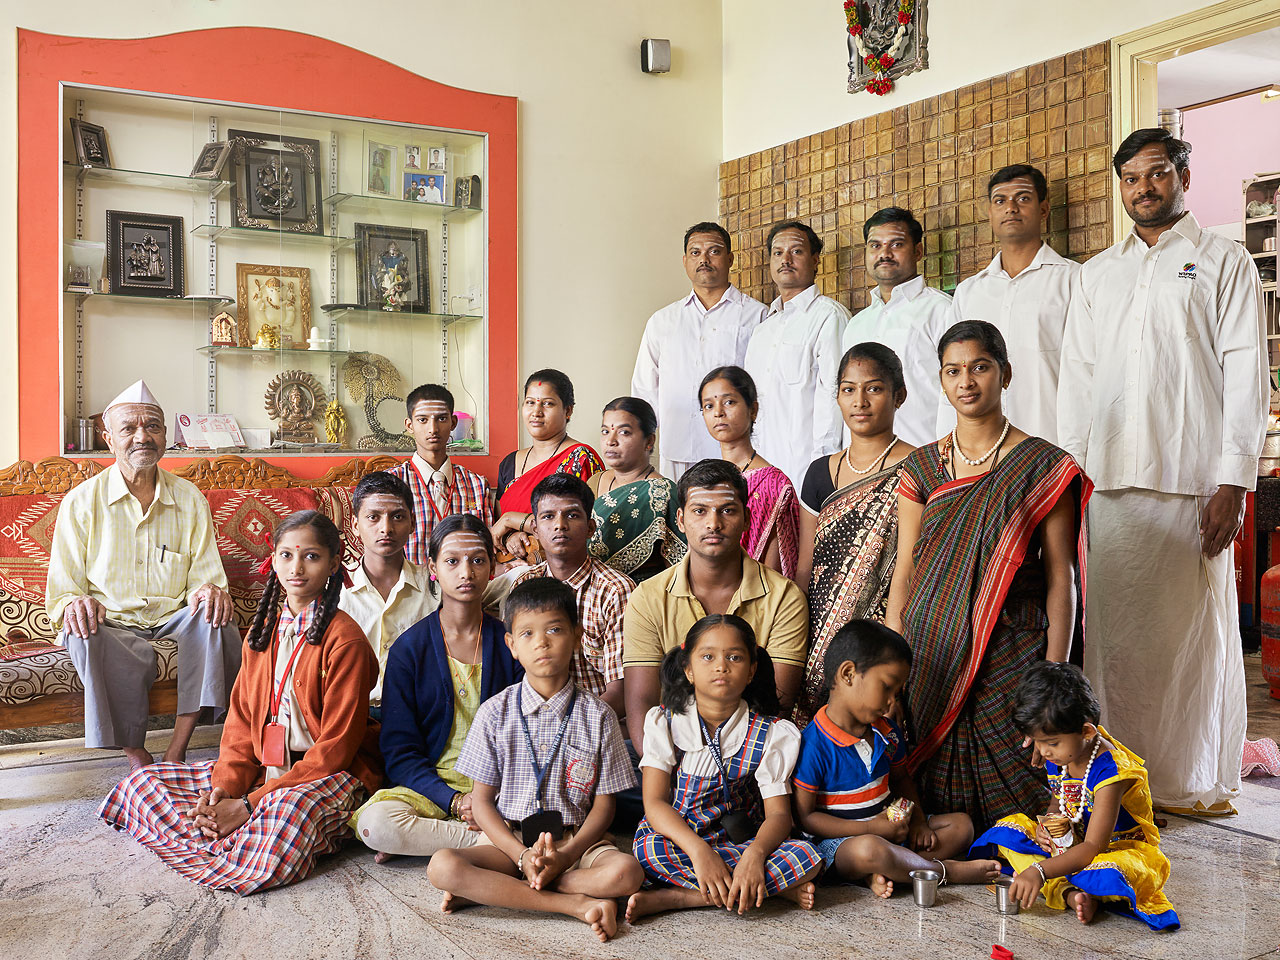 Nora Bibel - FAMILY COMES FIRST - Joint family portraits in Bangalore, India - Felix Schoeller Photoaward